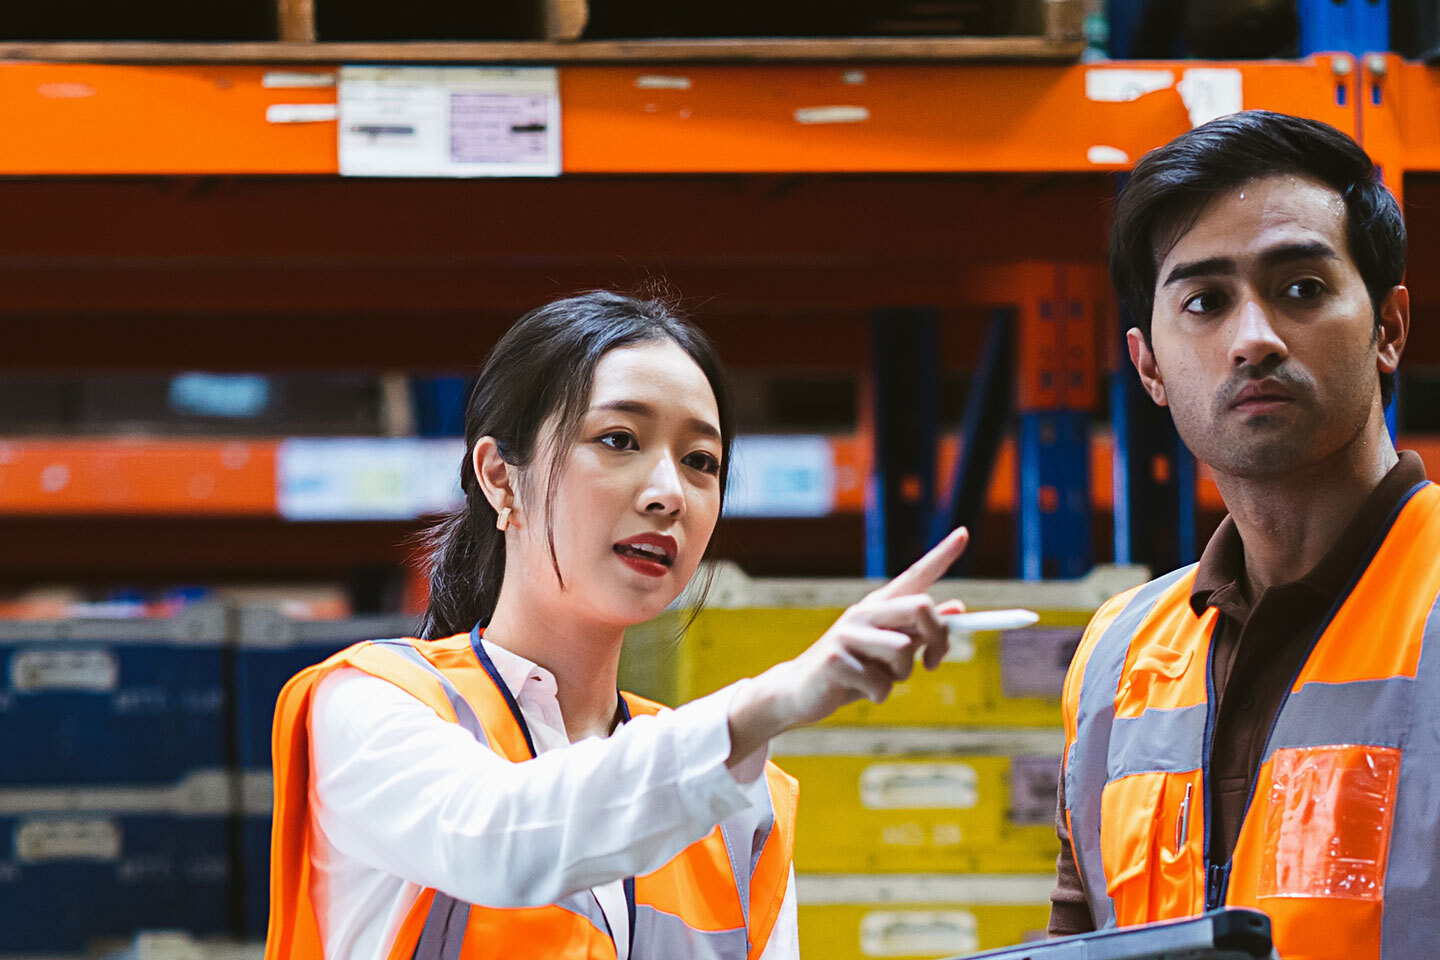 Two retail workers in the warehouse